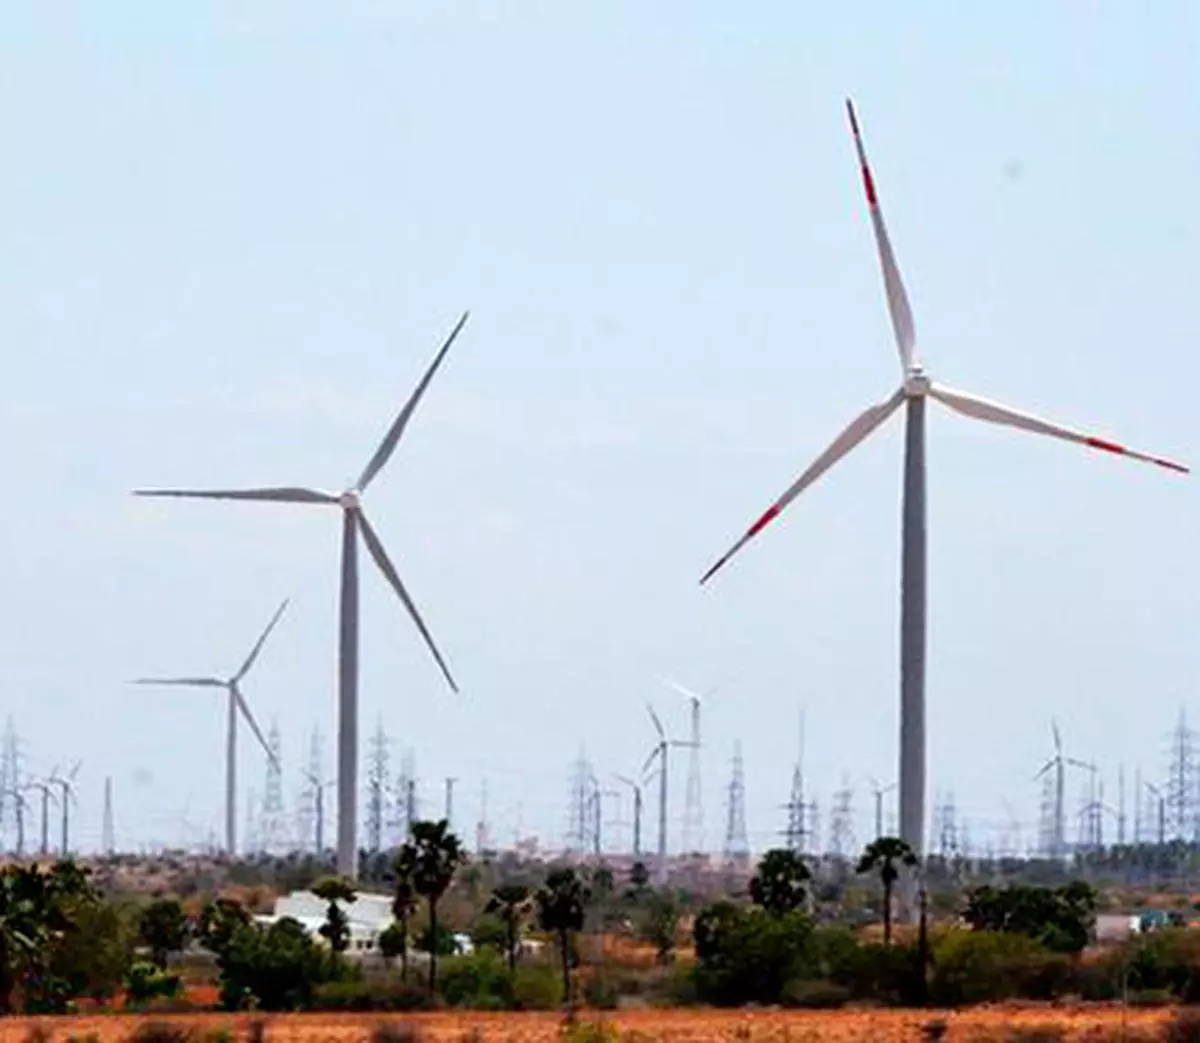 Renewable energy tariffs must be kept low and volumes high